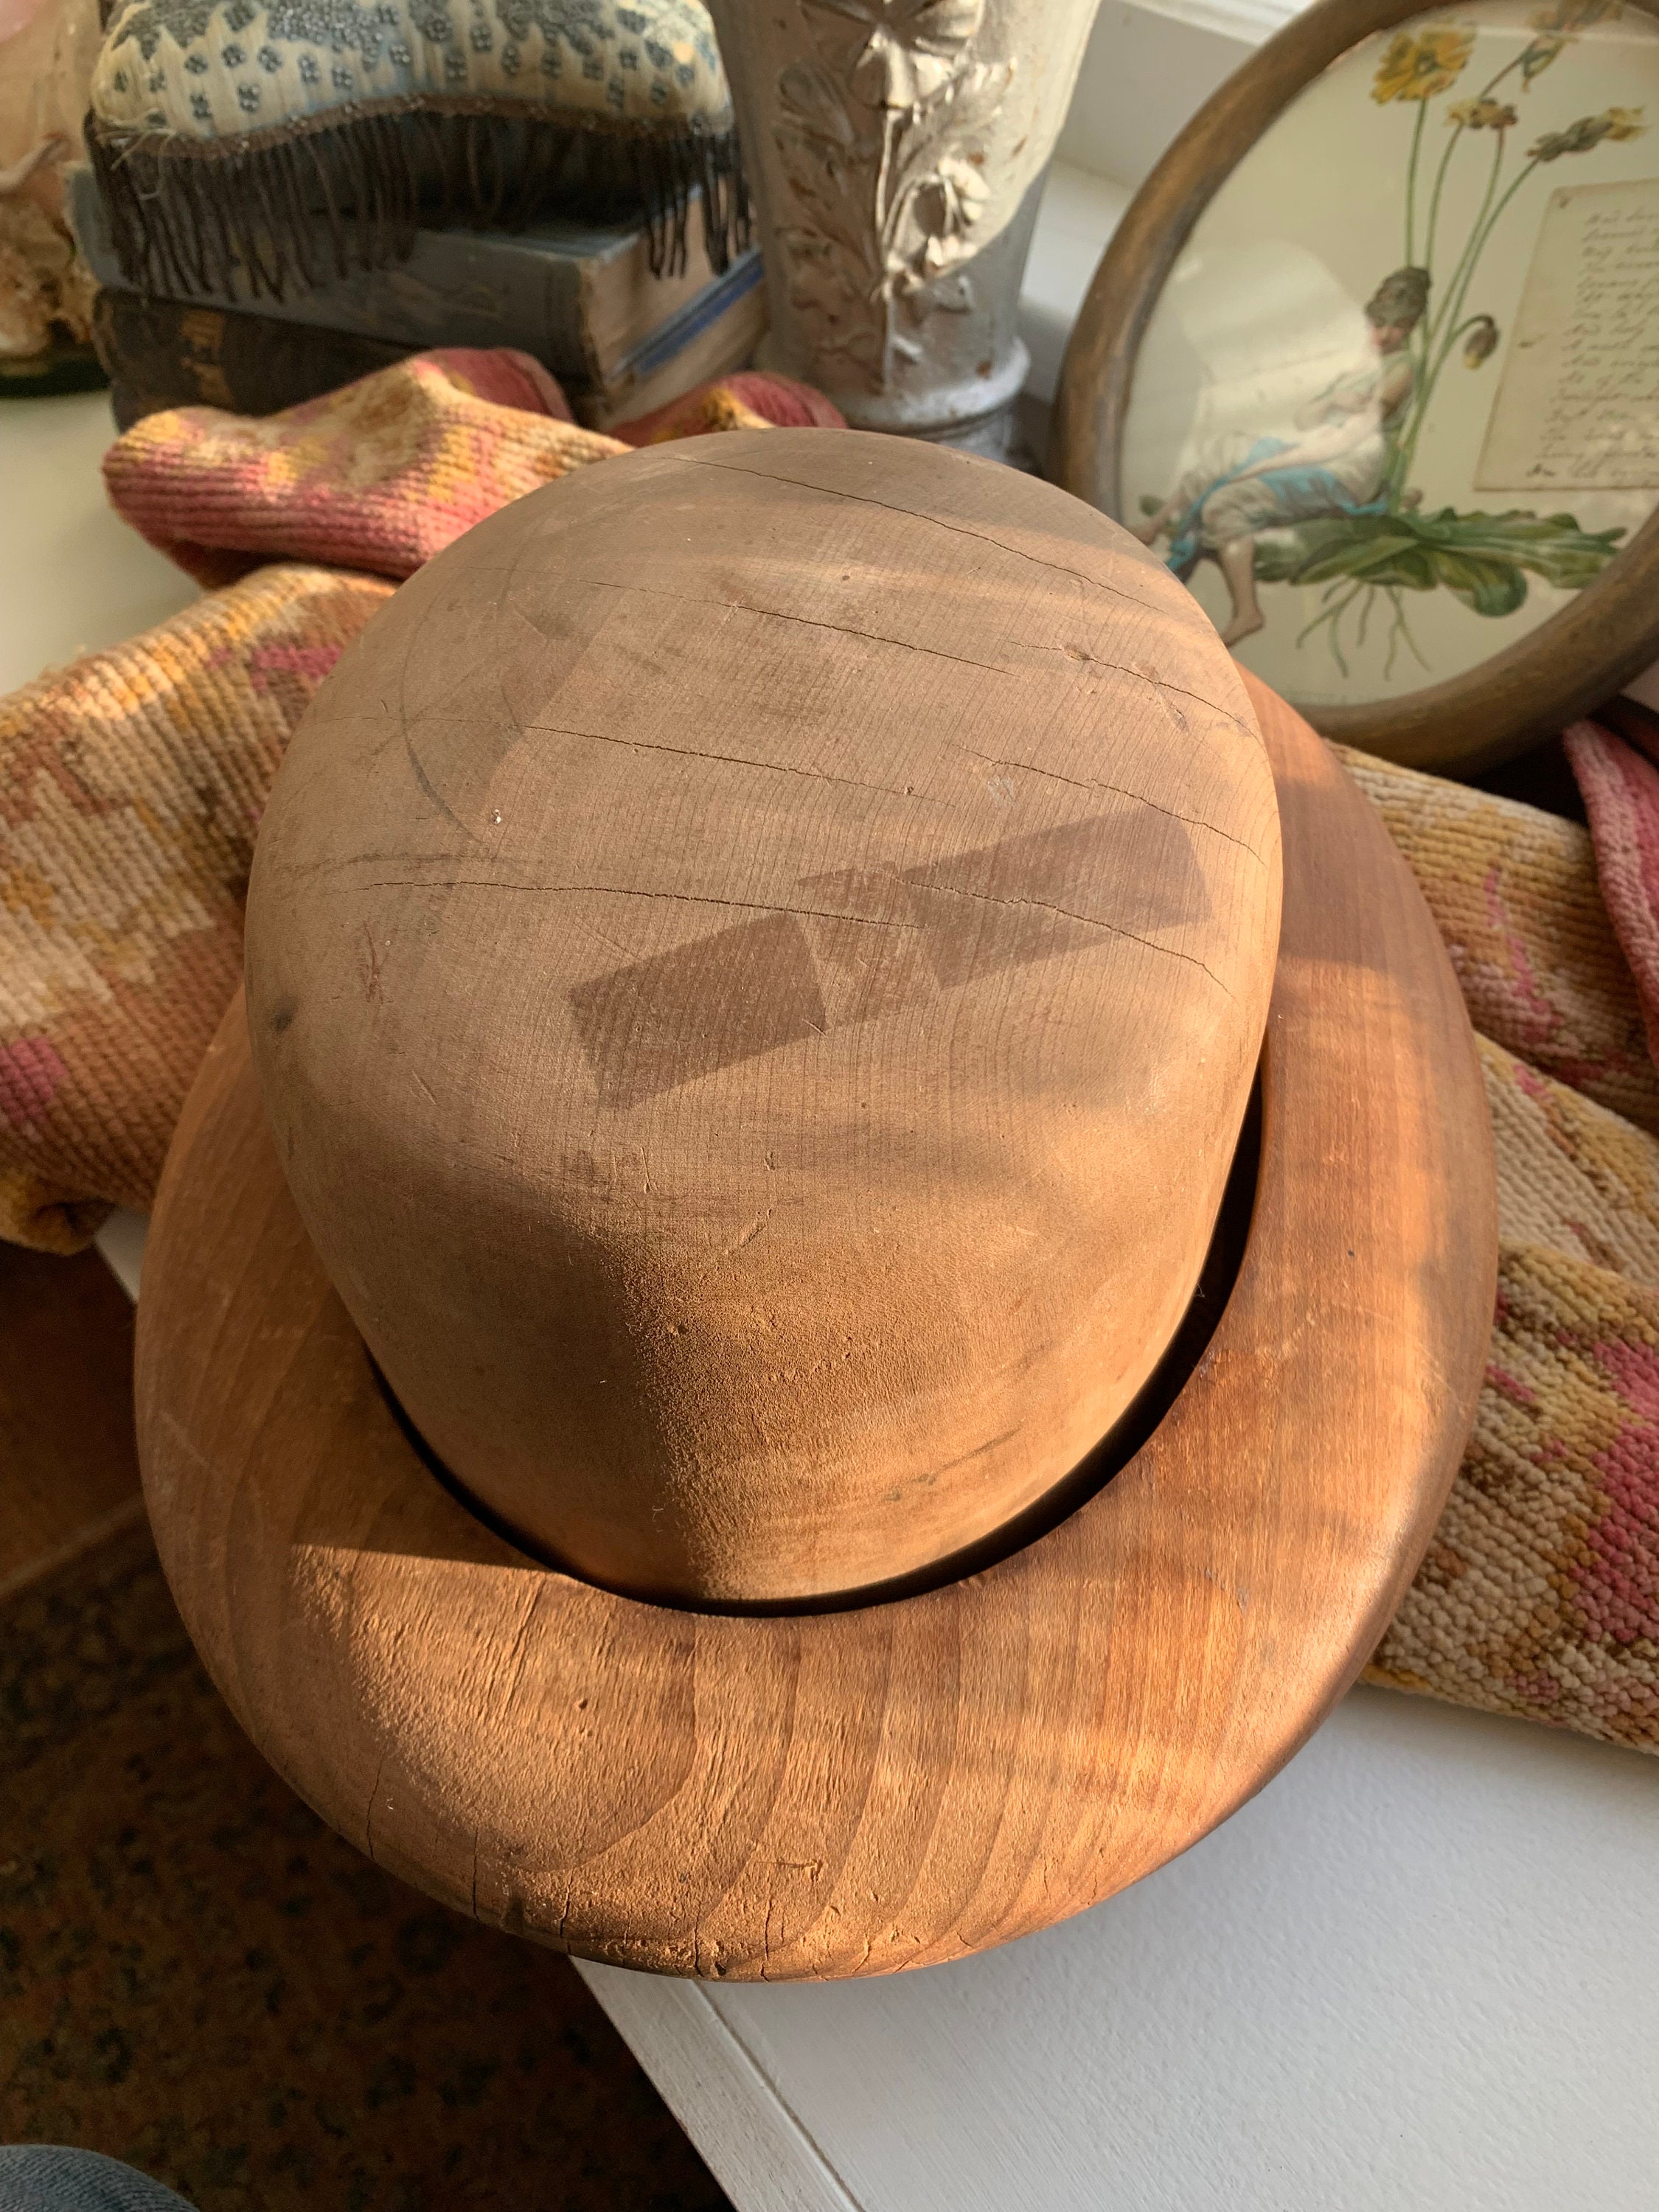 CG Hat Blocks – Home to hand crafted wooden hat blocks.